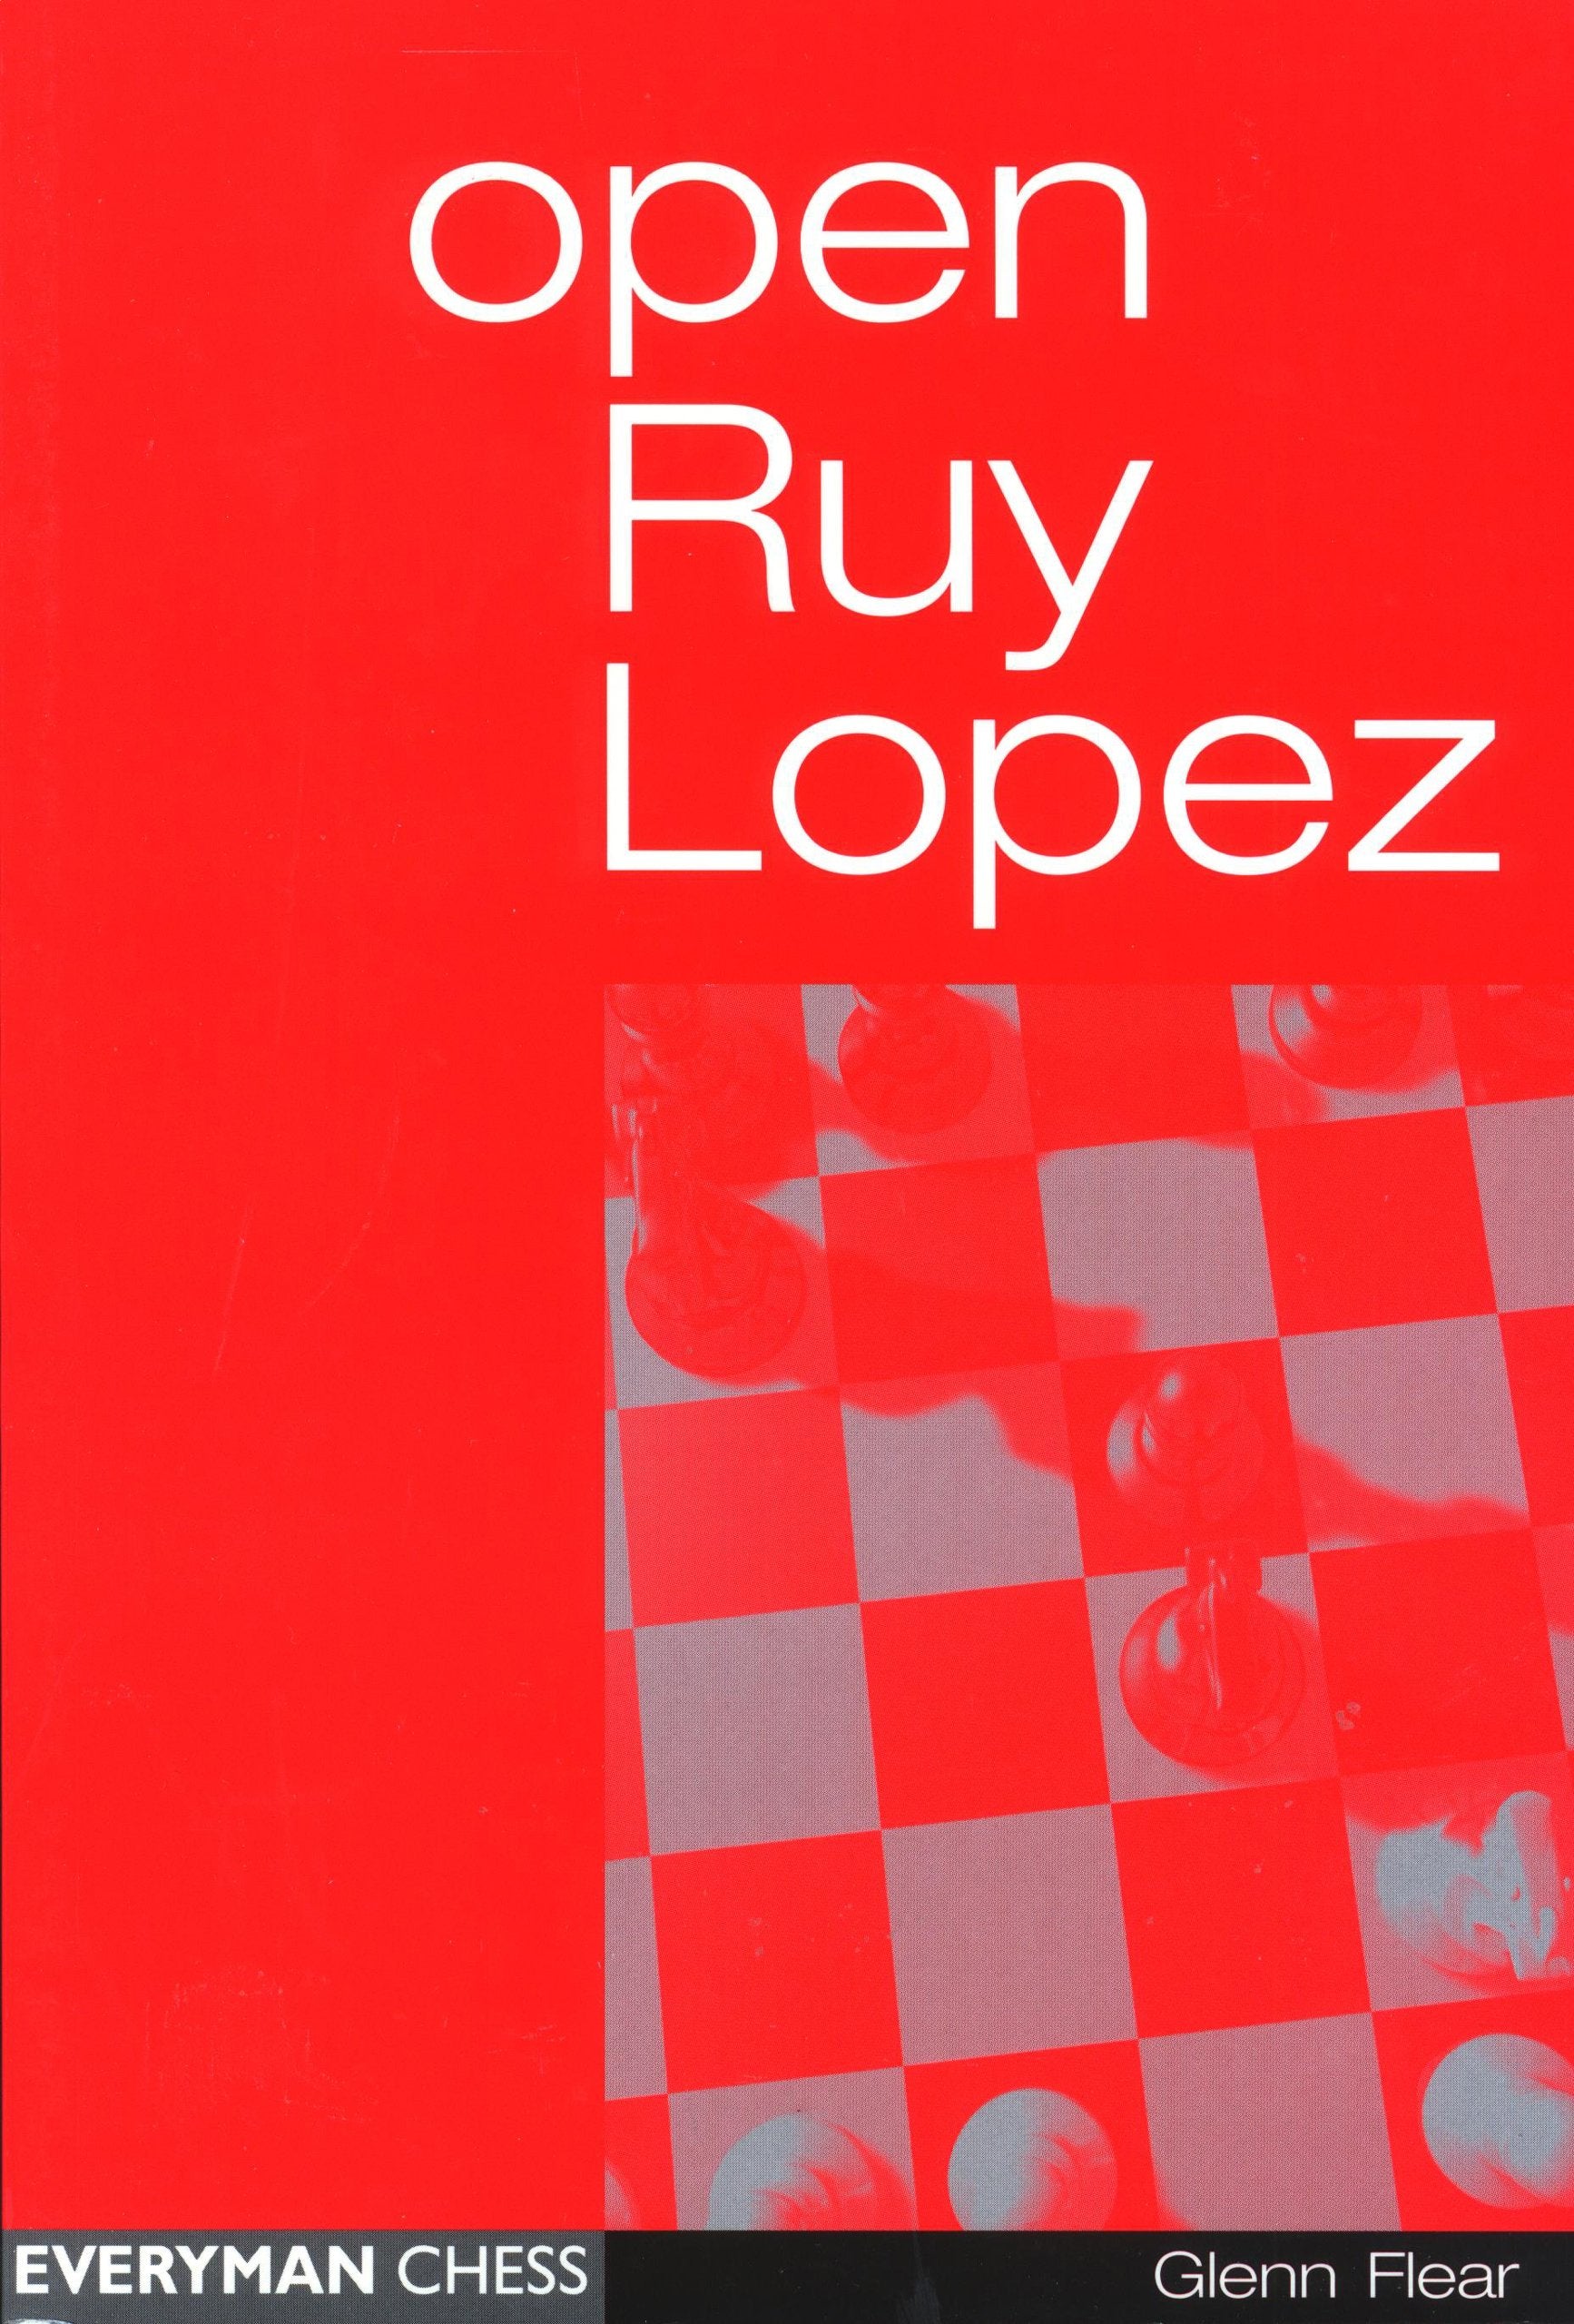 Starting Out: The Ruy Lopez – Everyman Chess